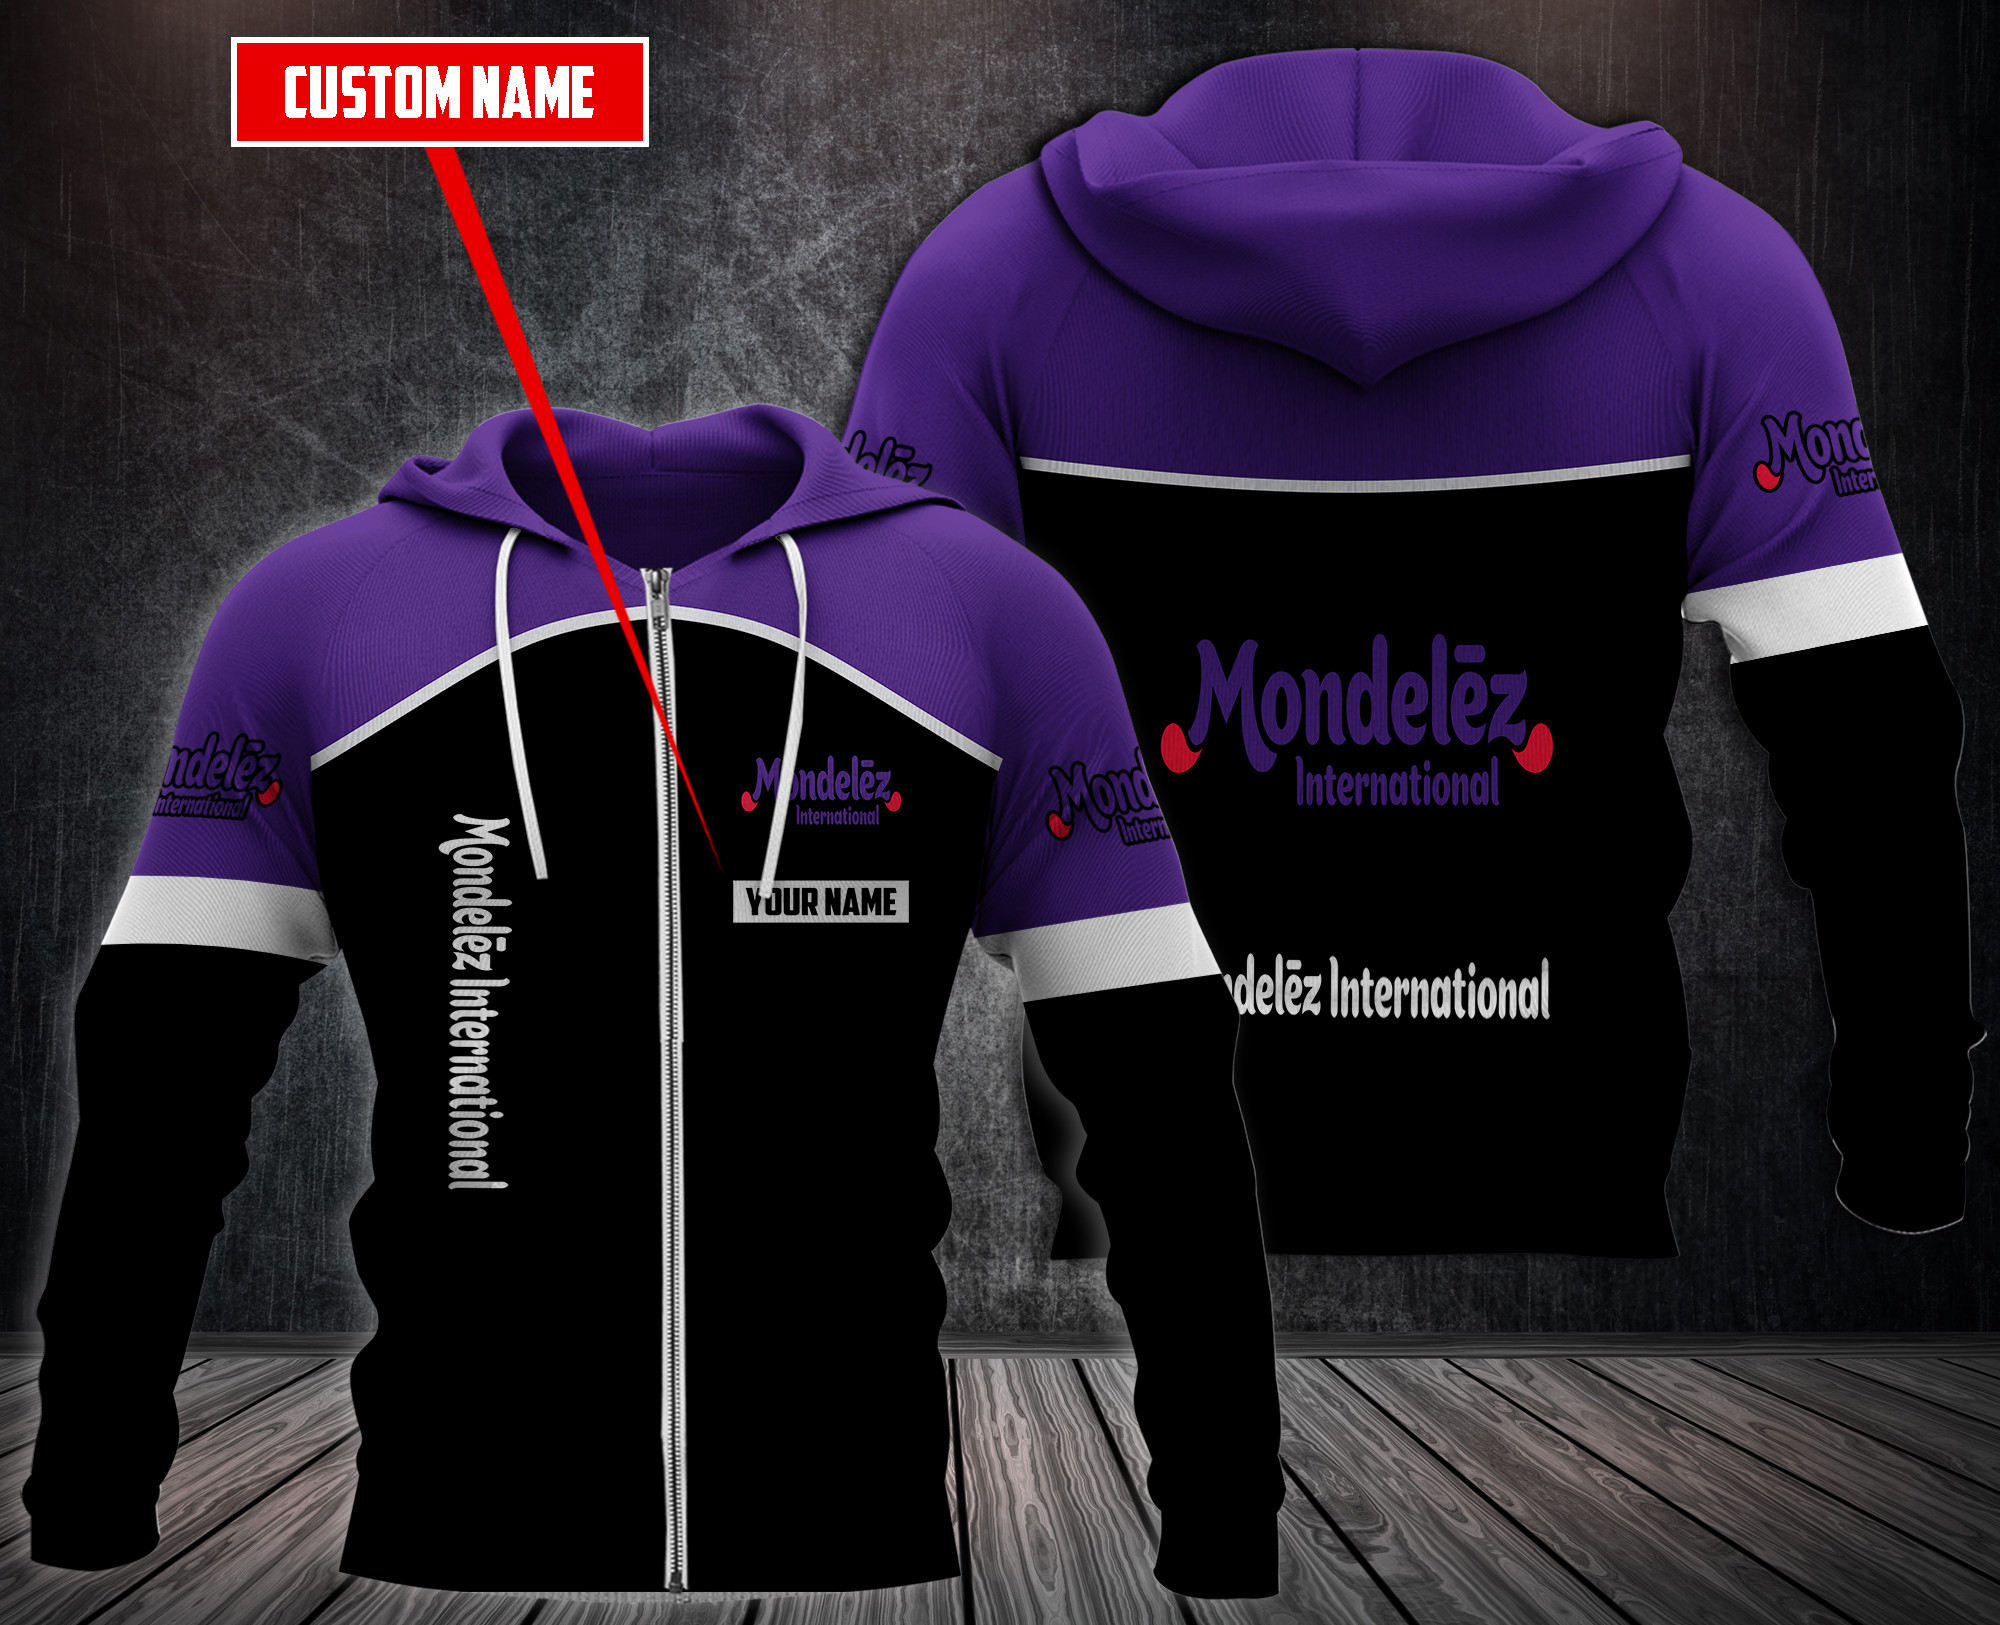 Choose the right hoodies for you on our boxboxshirt and ethershirt websites in 2022 89